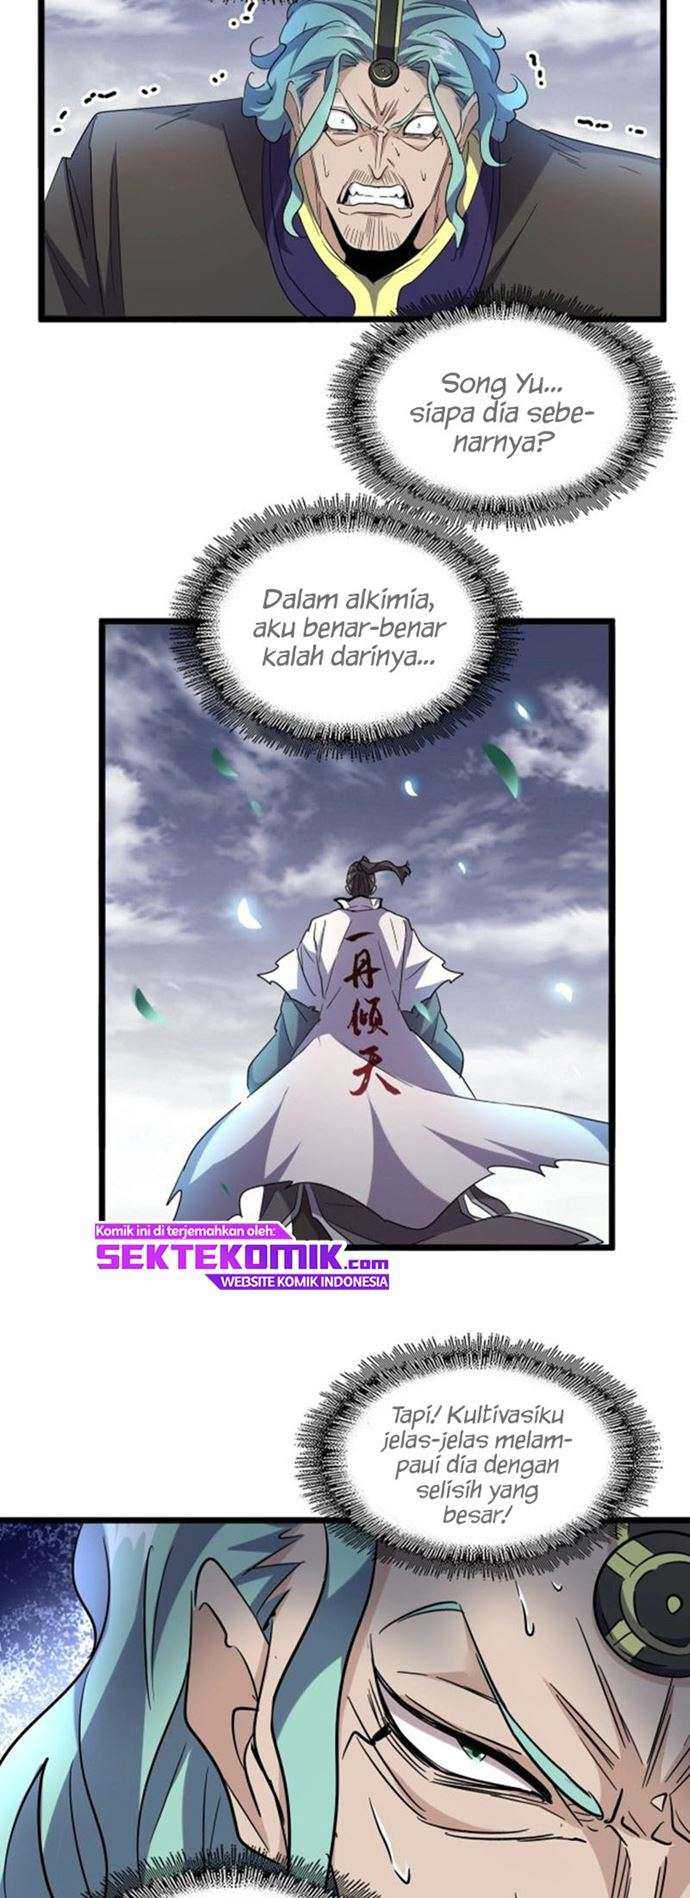 Magic Emperor Chapter 184 Image 6